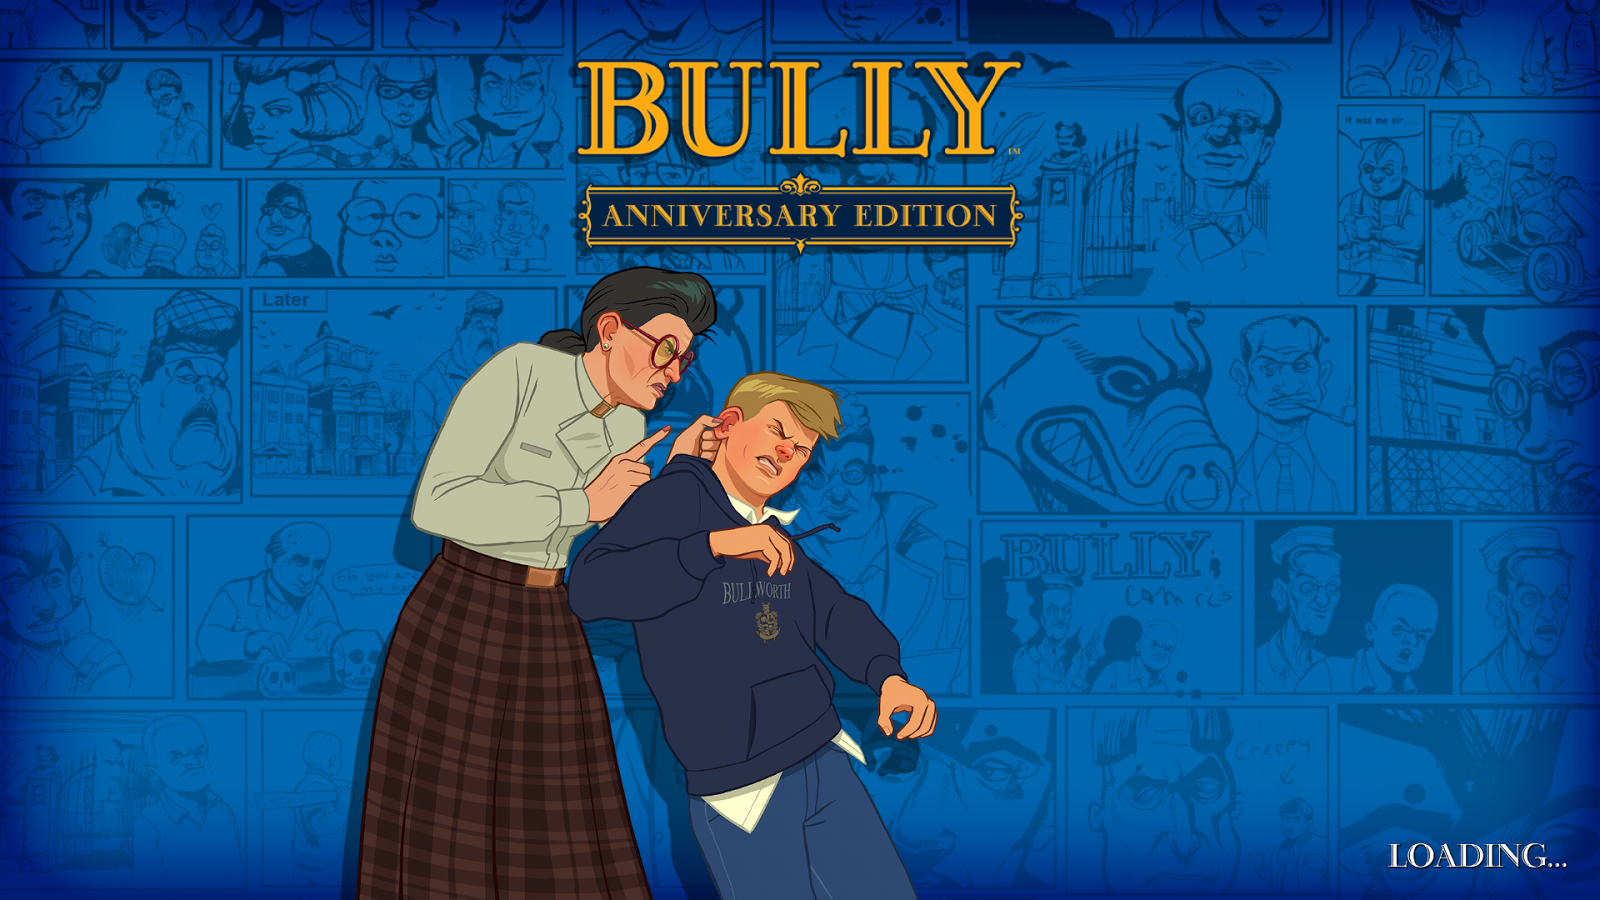 Download Bully : Anniversary Edition APK MOD + OBB, Game Bully Yang.